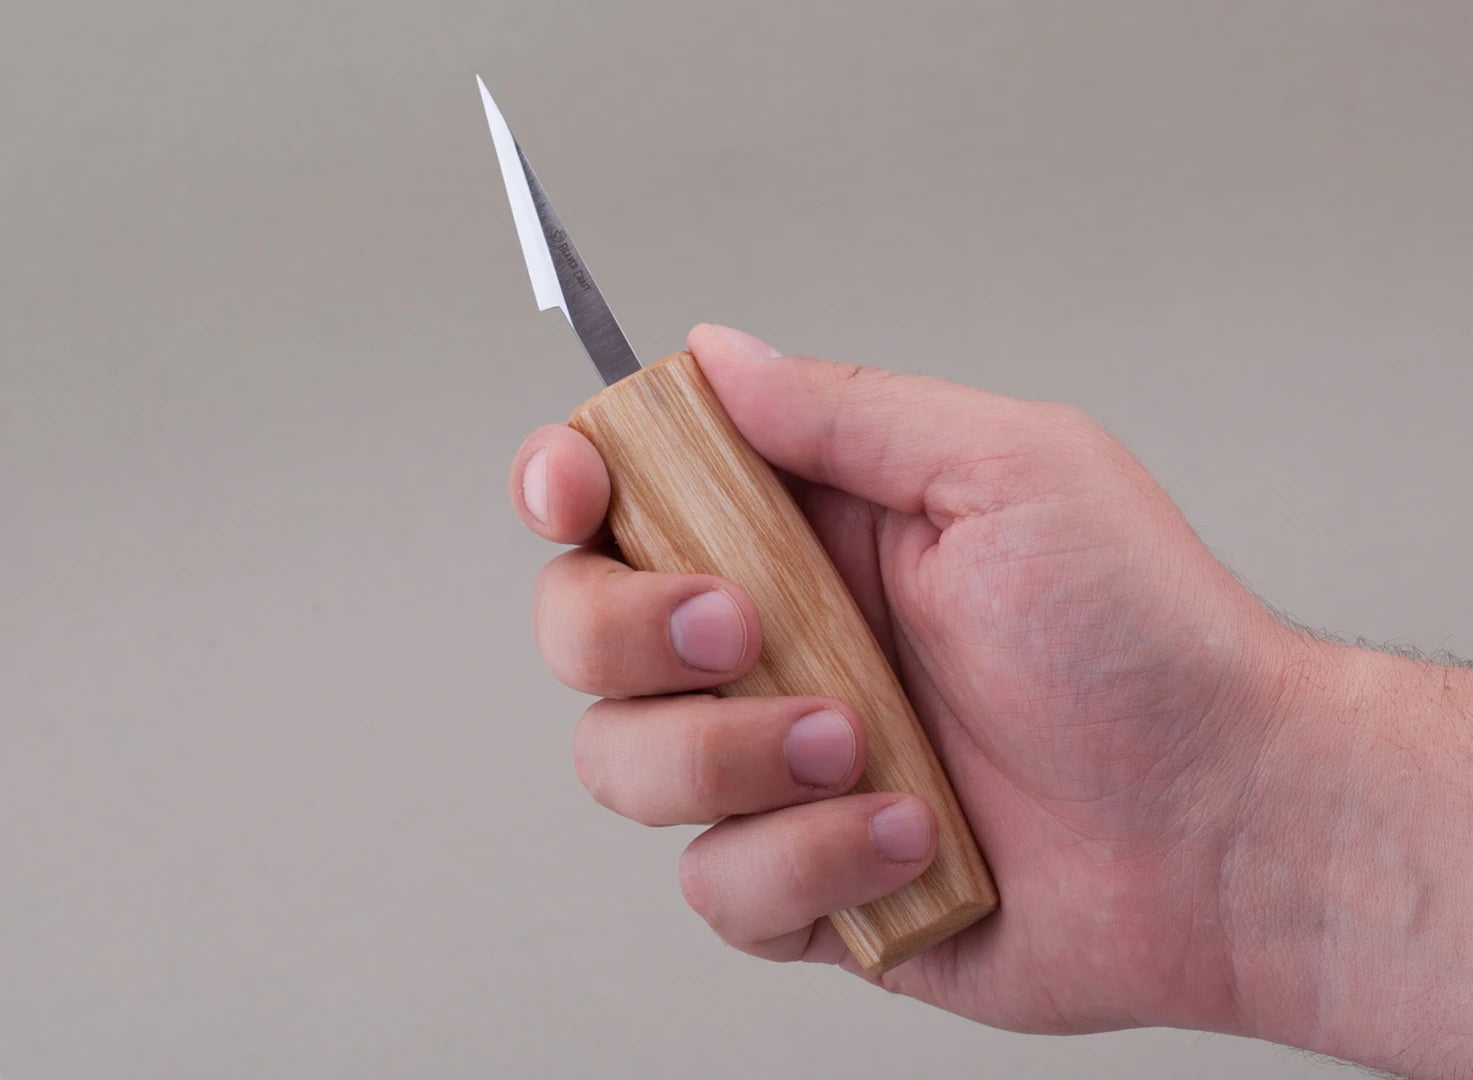 Small wood carving knife items for sale online - BeaverCraft